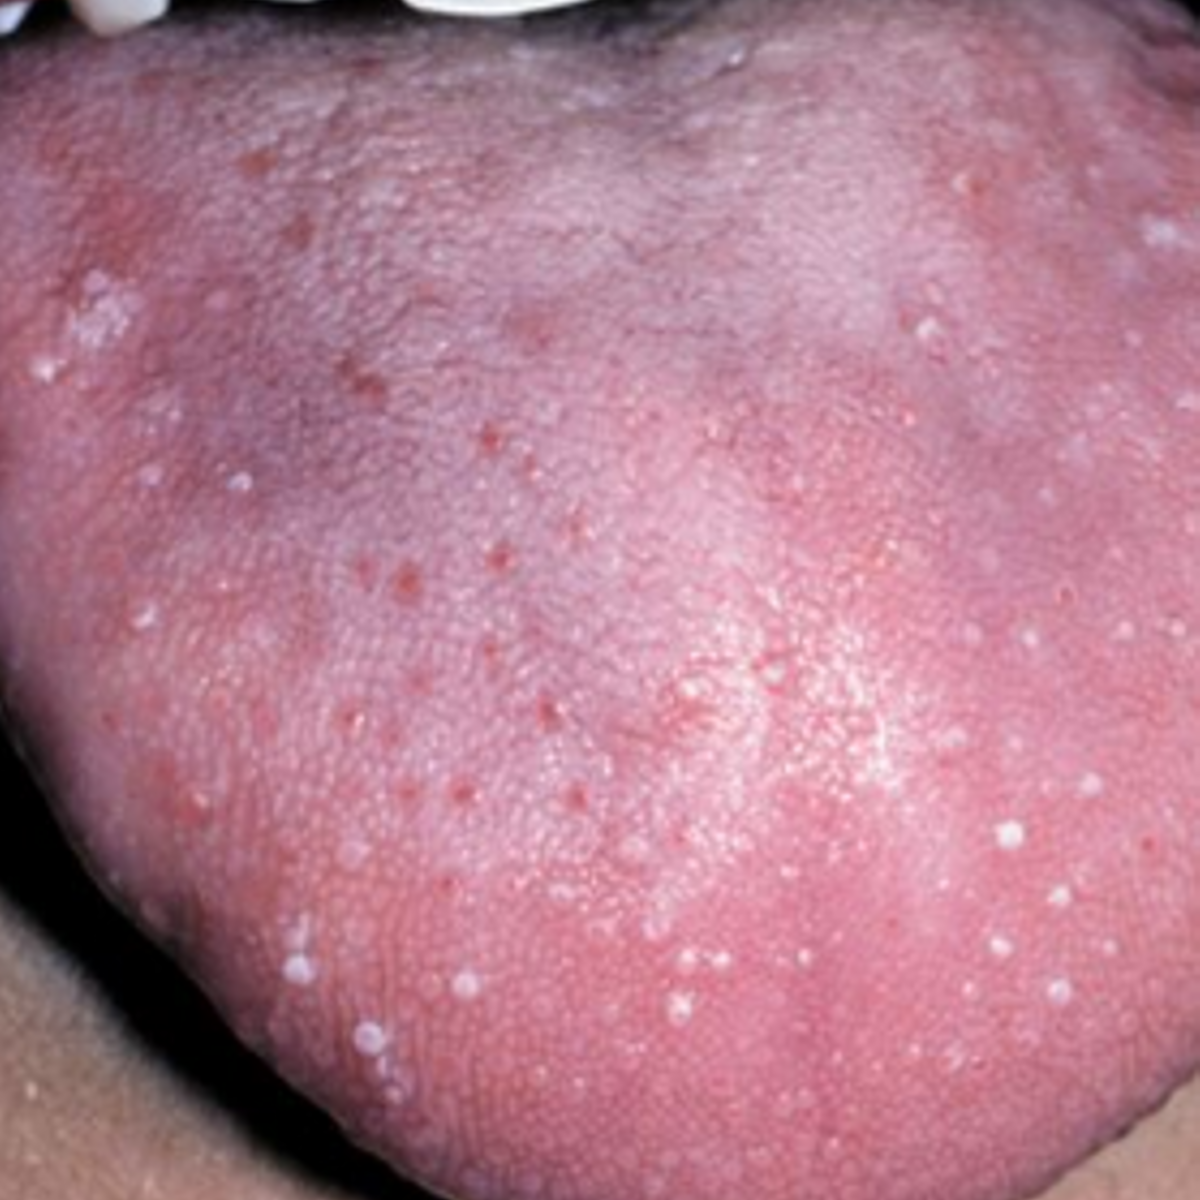 3 Causes Of Tongue Bumps